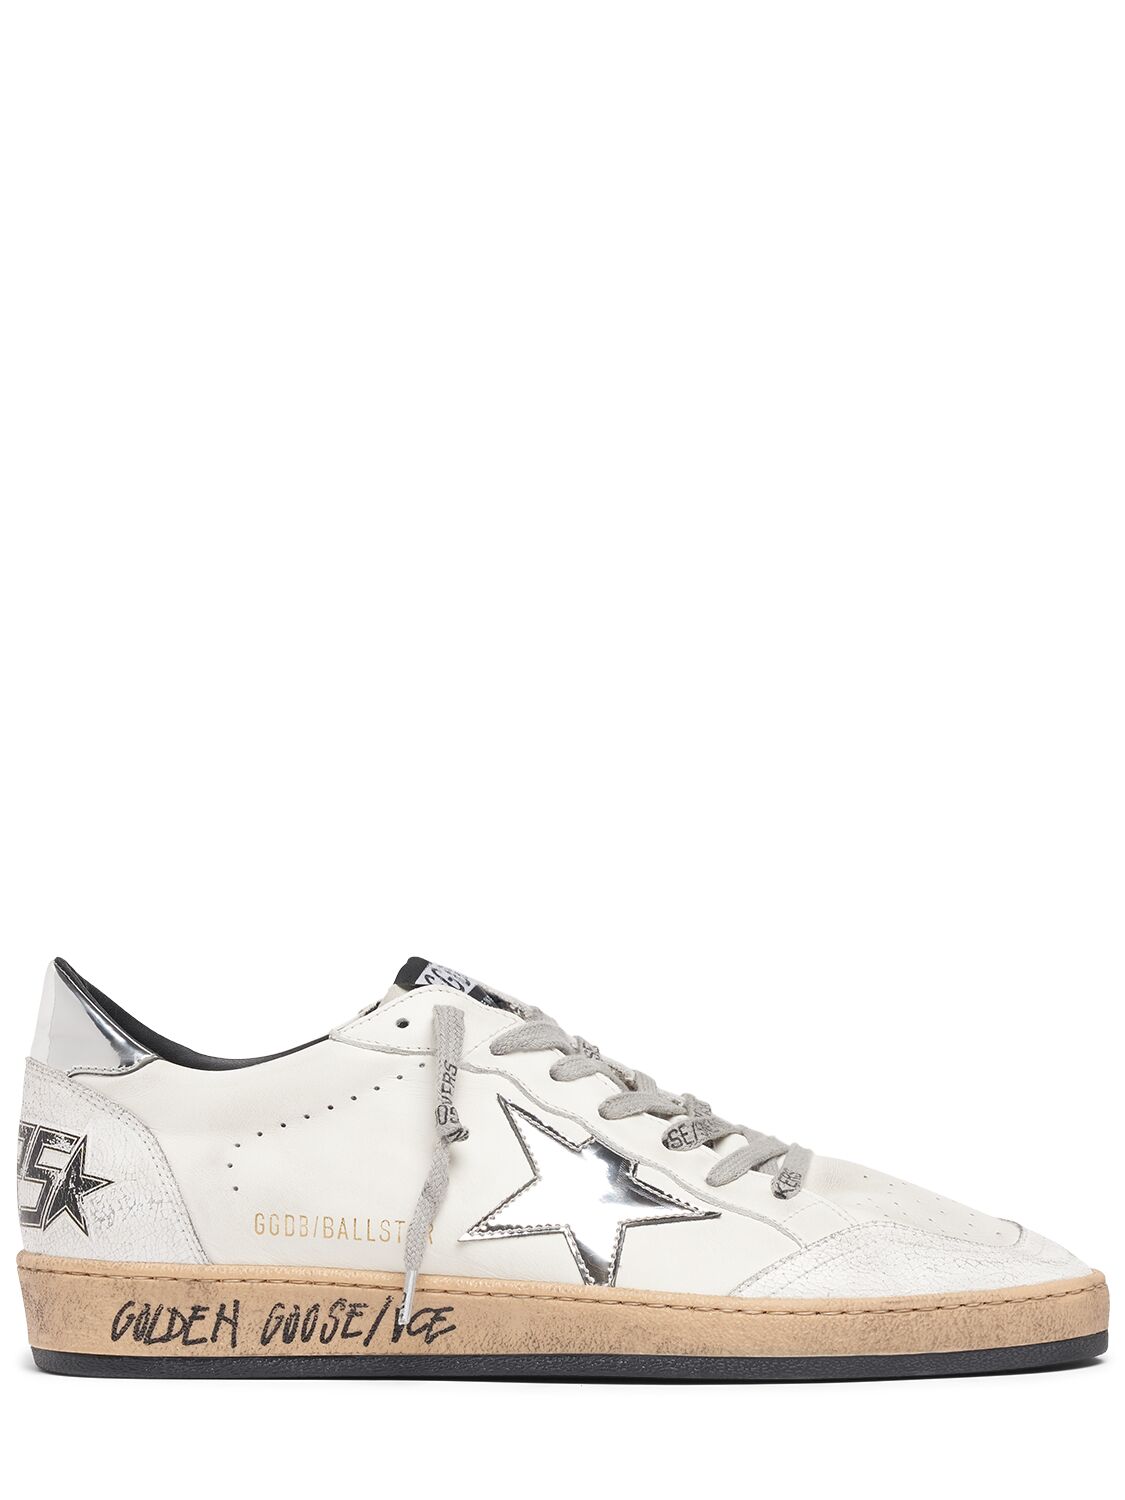 Golden Goose Ball Star Leather Sneakers In White,silver